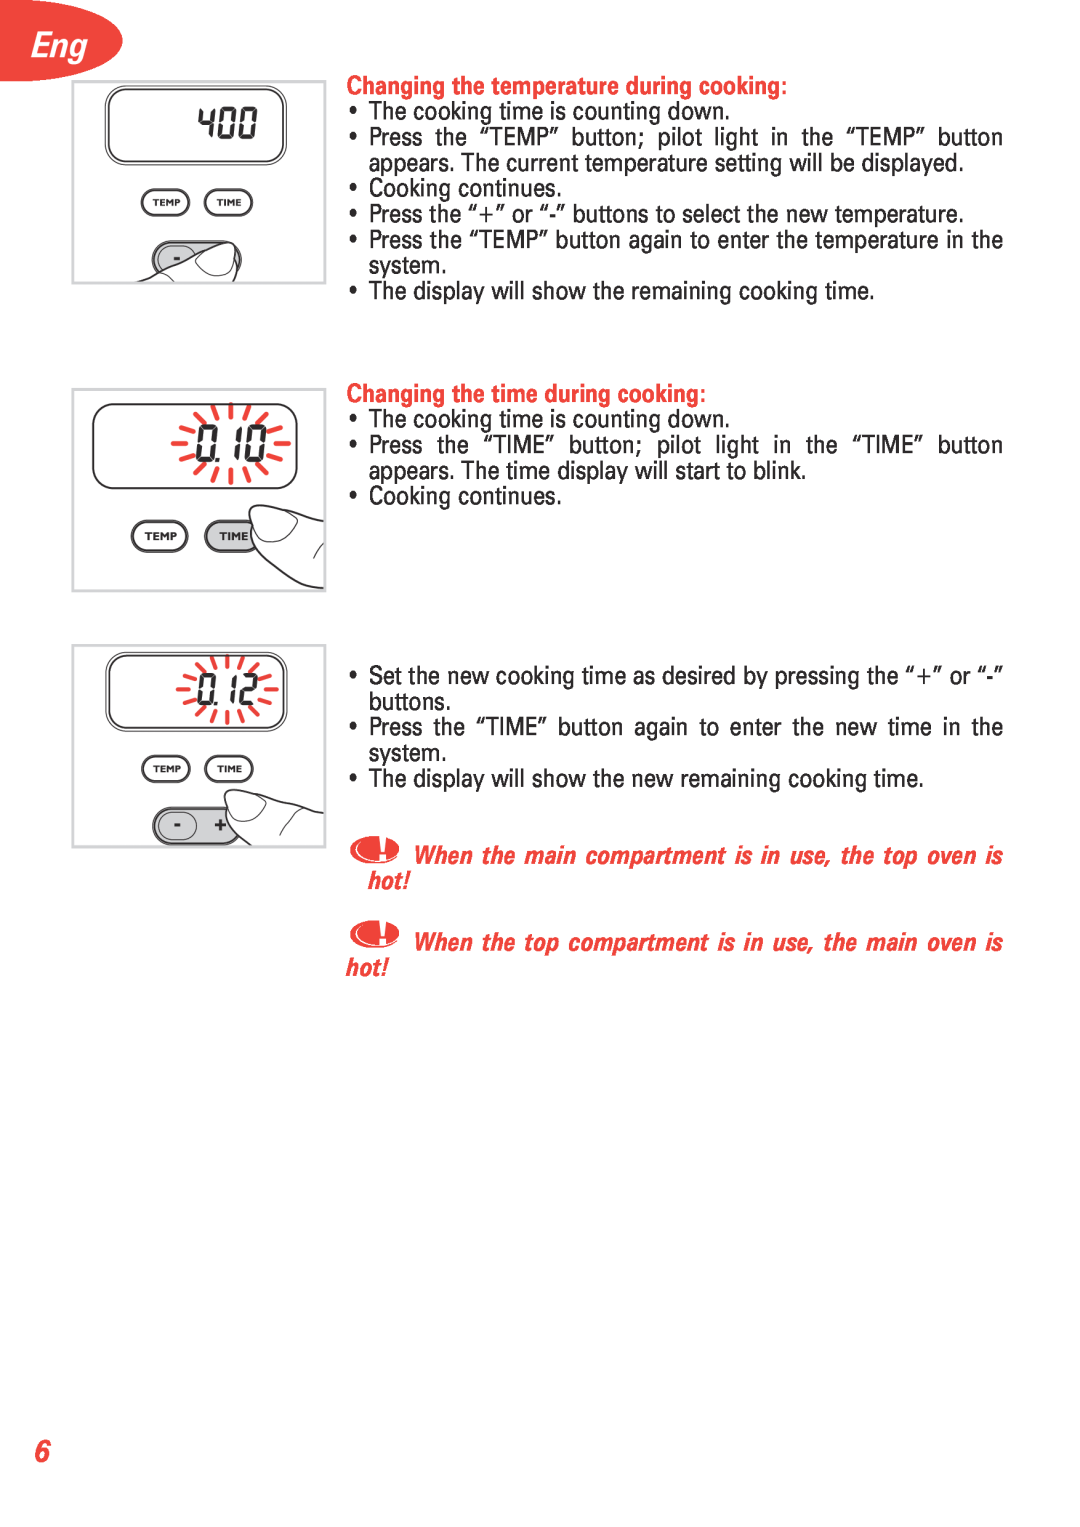 T-Fal 5252 manual Changing the temperature during cooking, Changing the time during cooking 